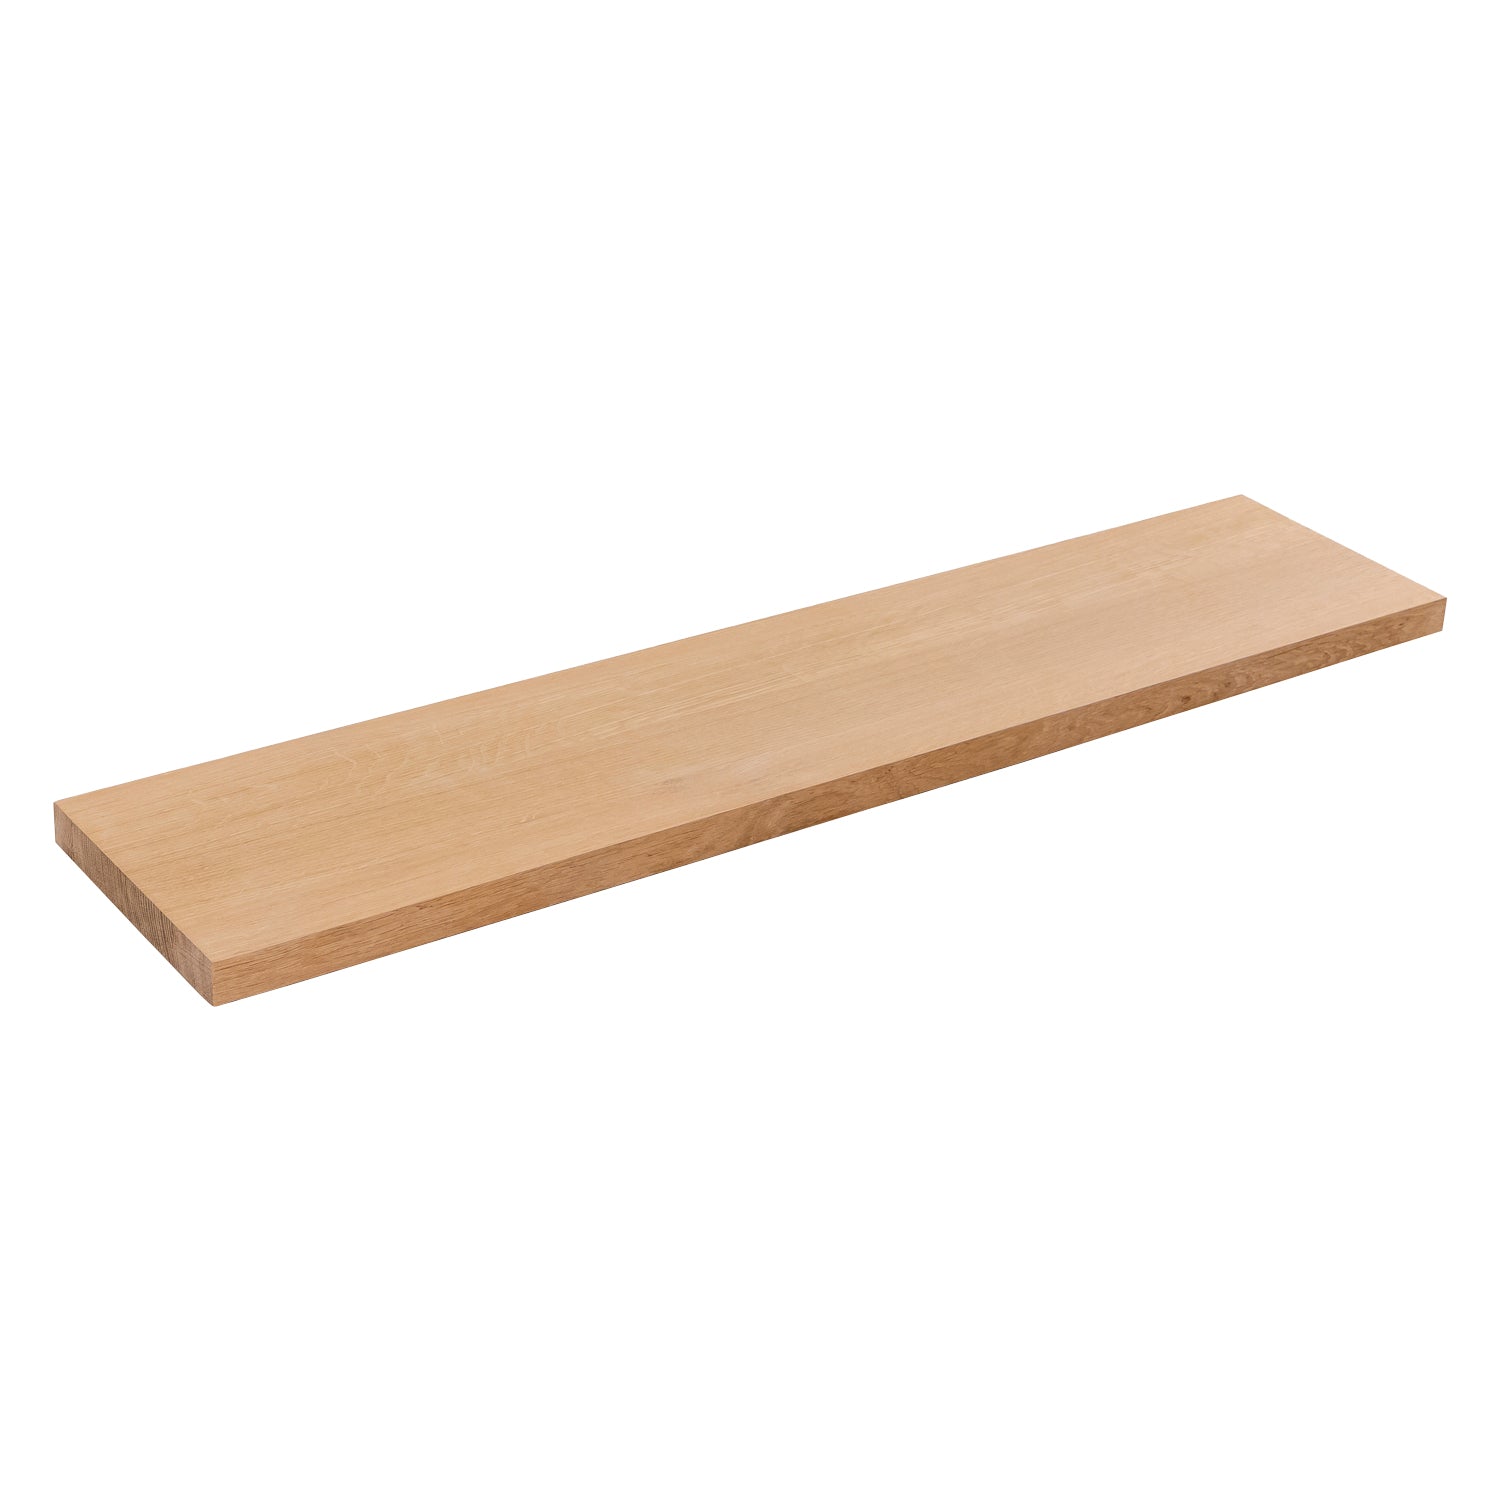 Full Stave Prime Oak Solid Wood Shelf - 27mm thick